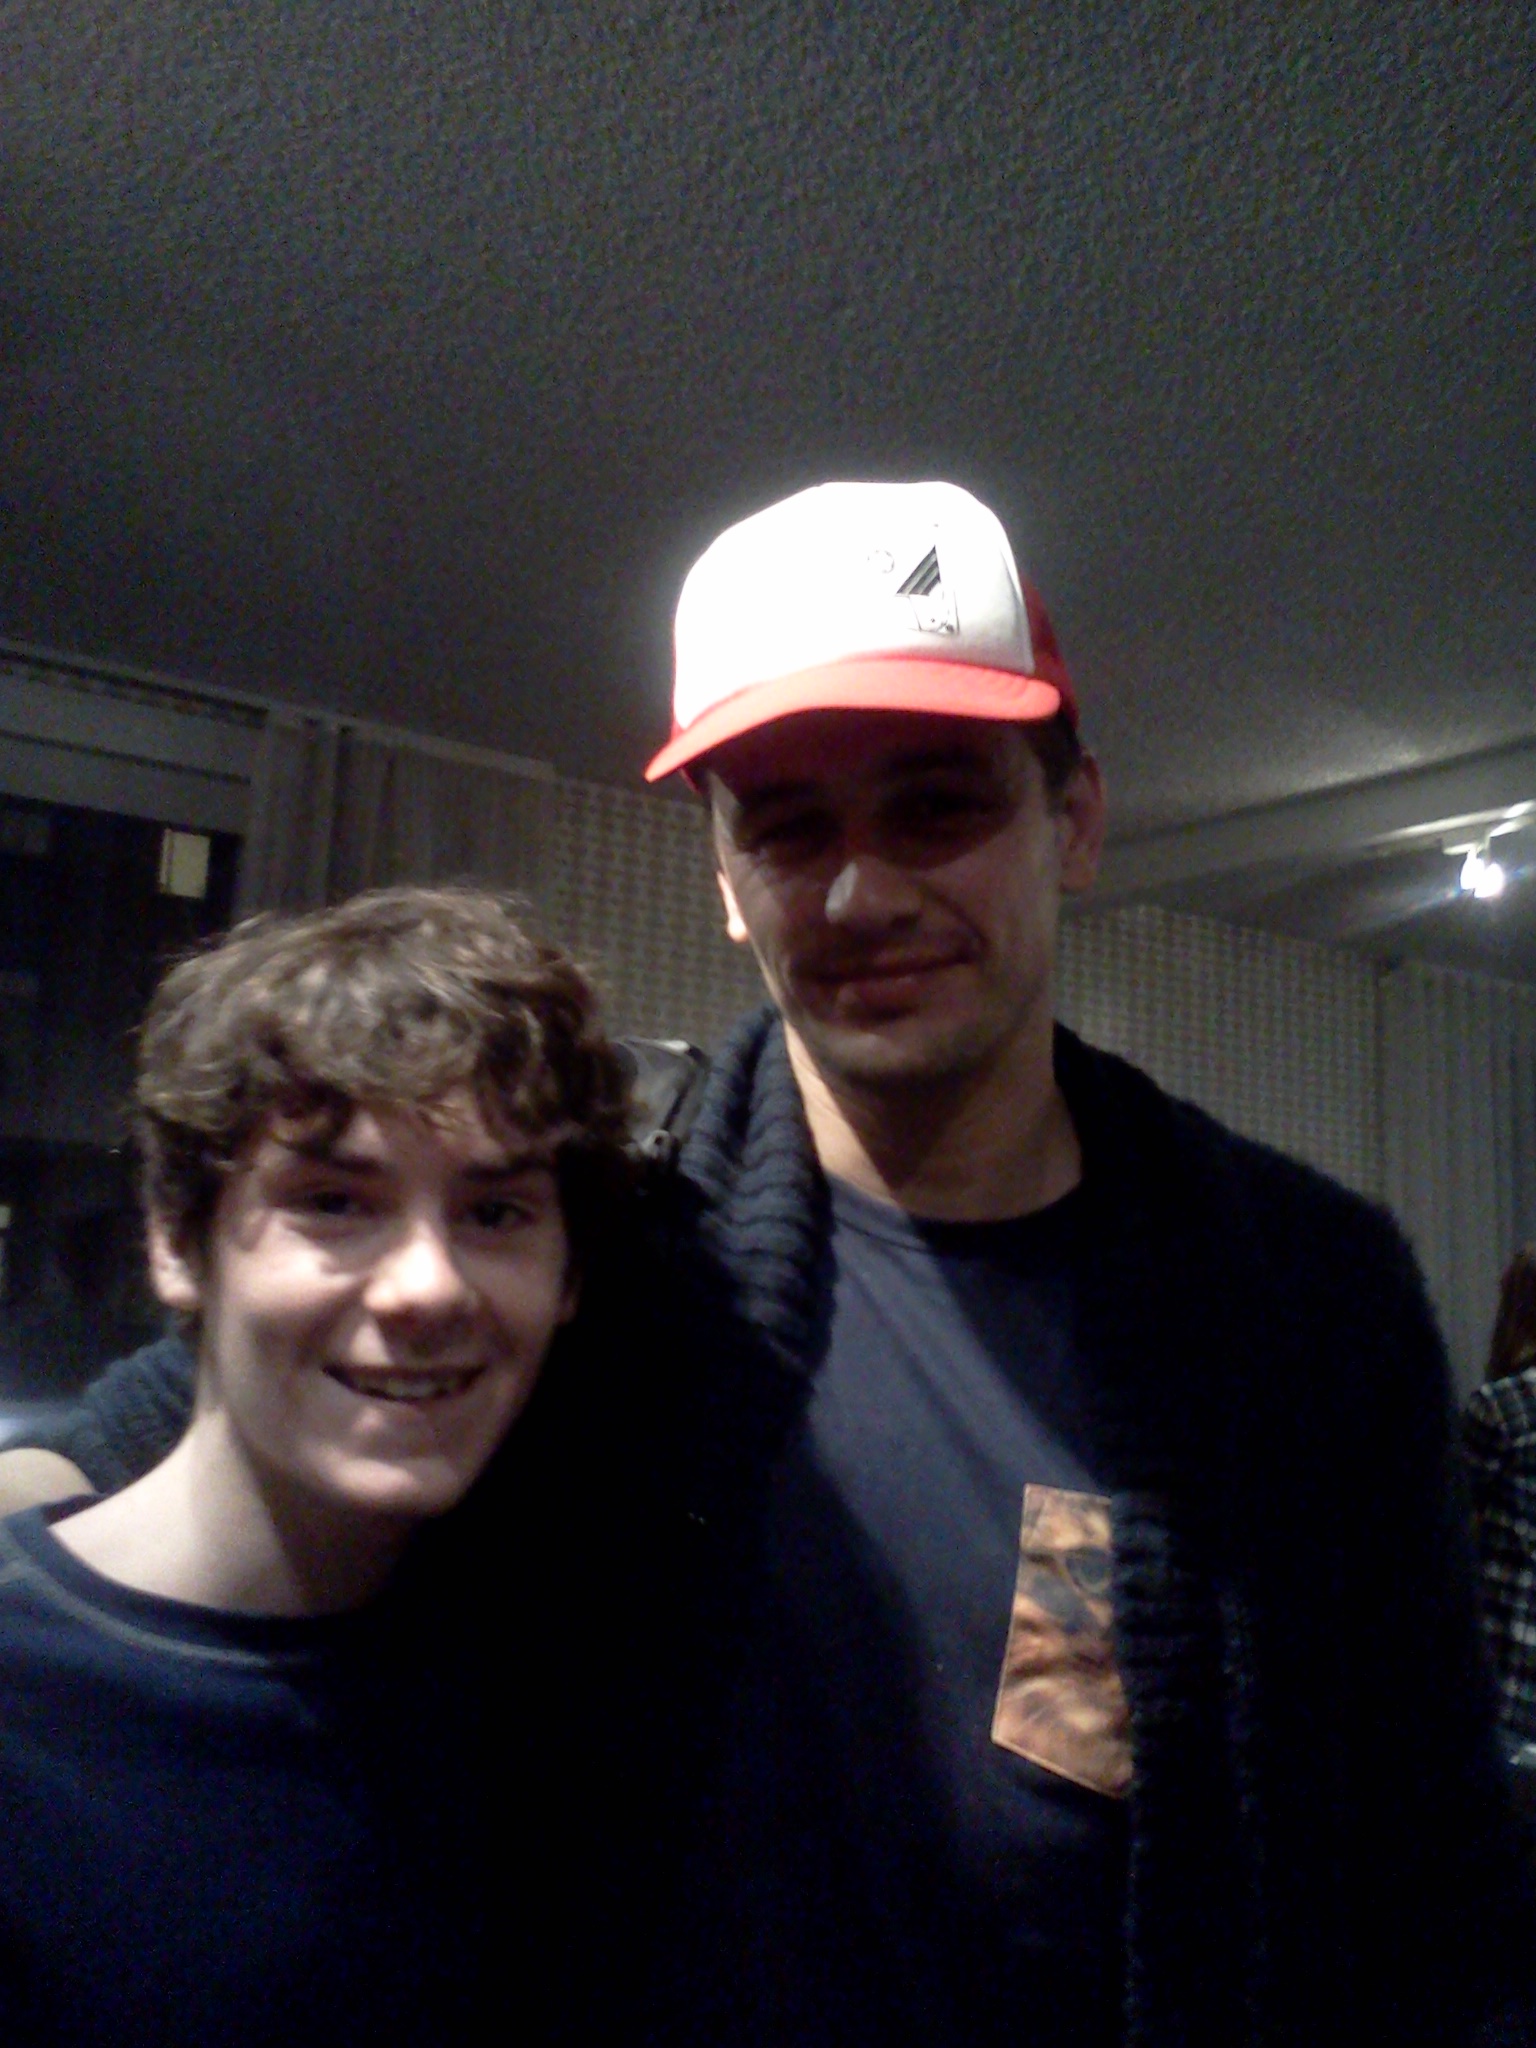 William Leon with James Franco at the Don Quixote table read